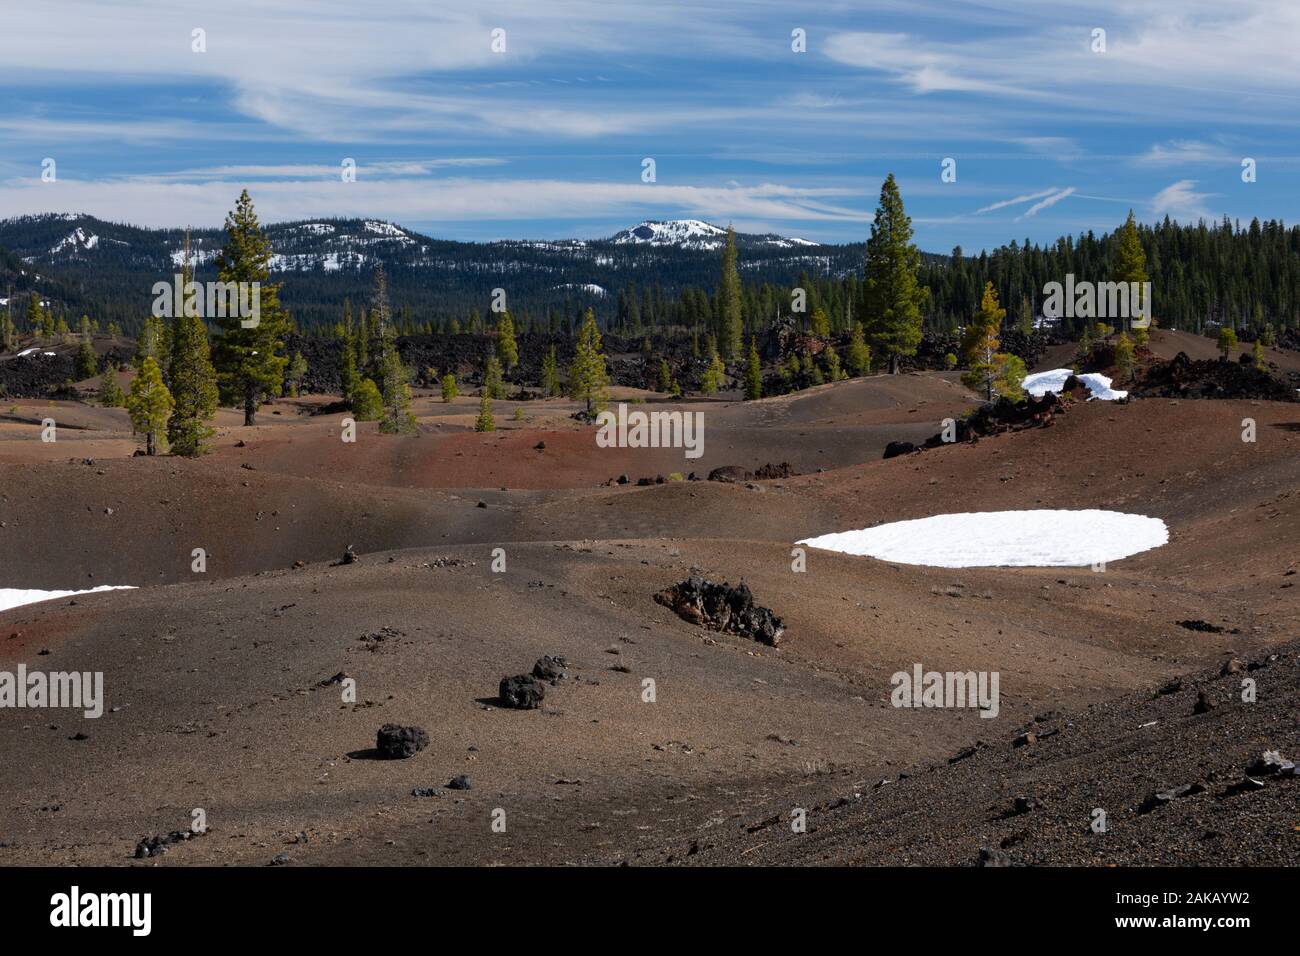 View of hilly terrain in winter, Lassen Volcanic National Park, California, USA Stock Photo